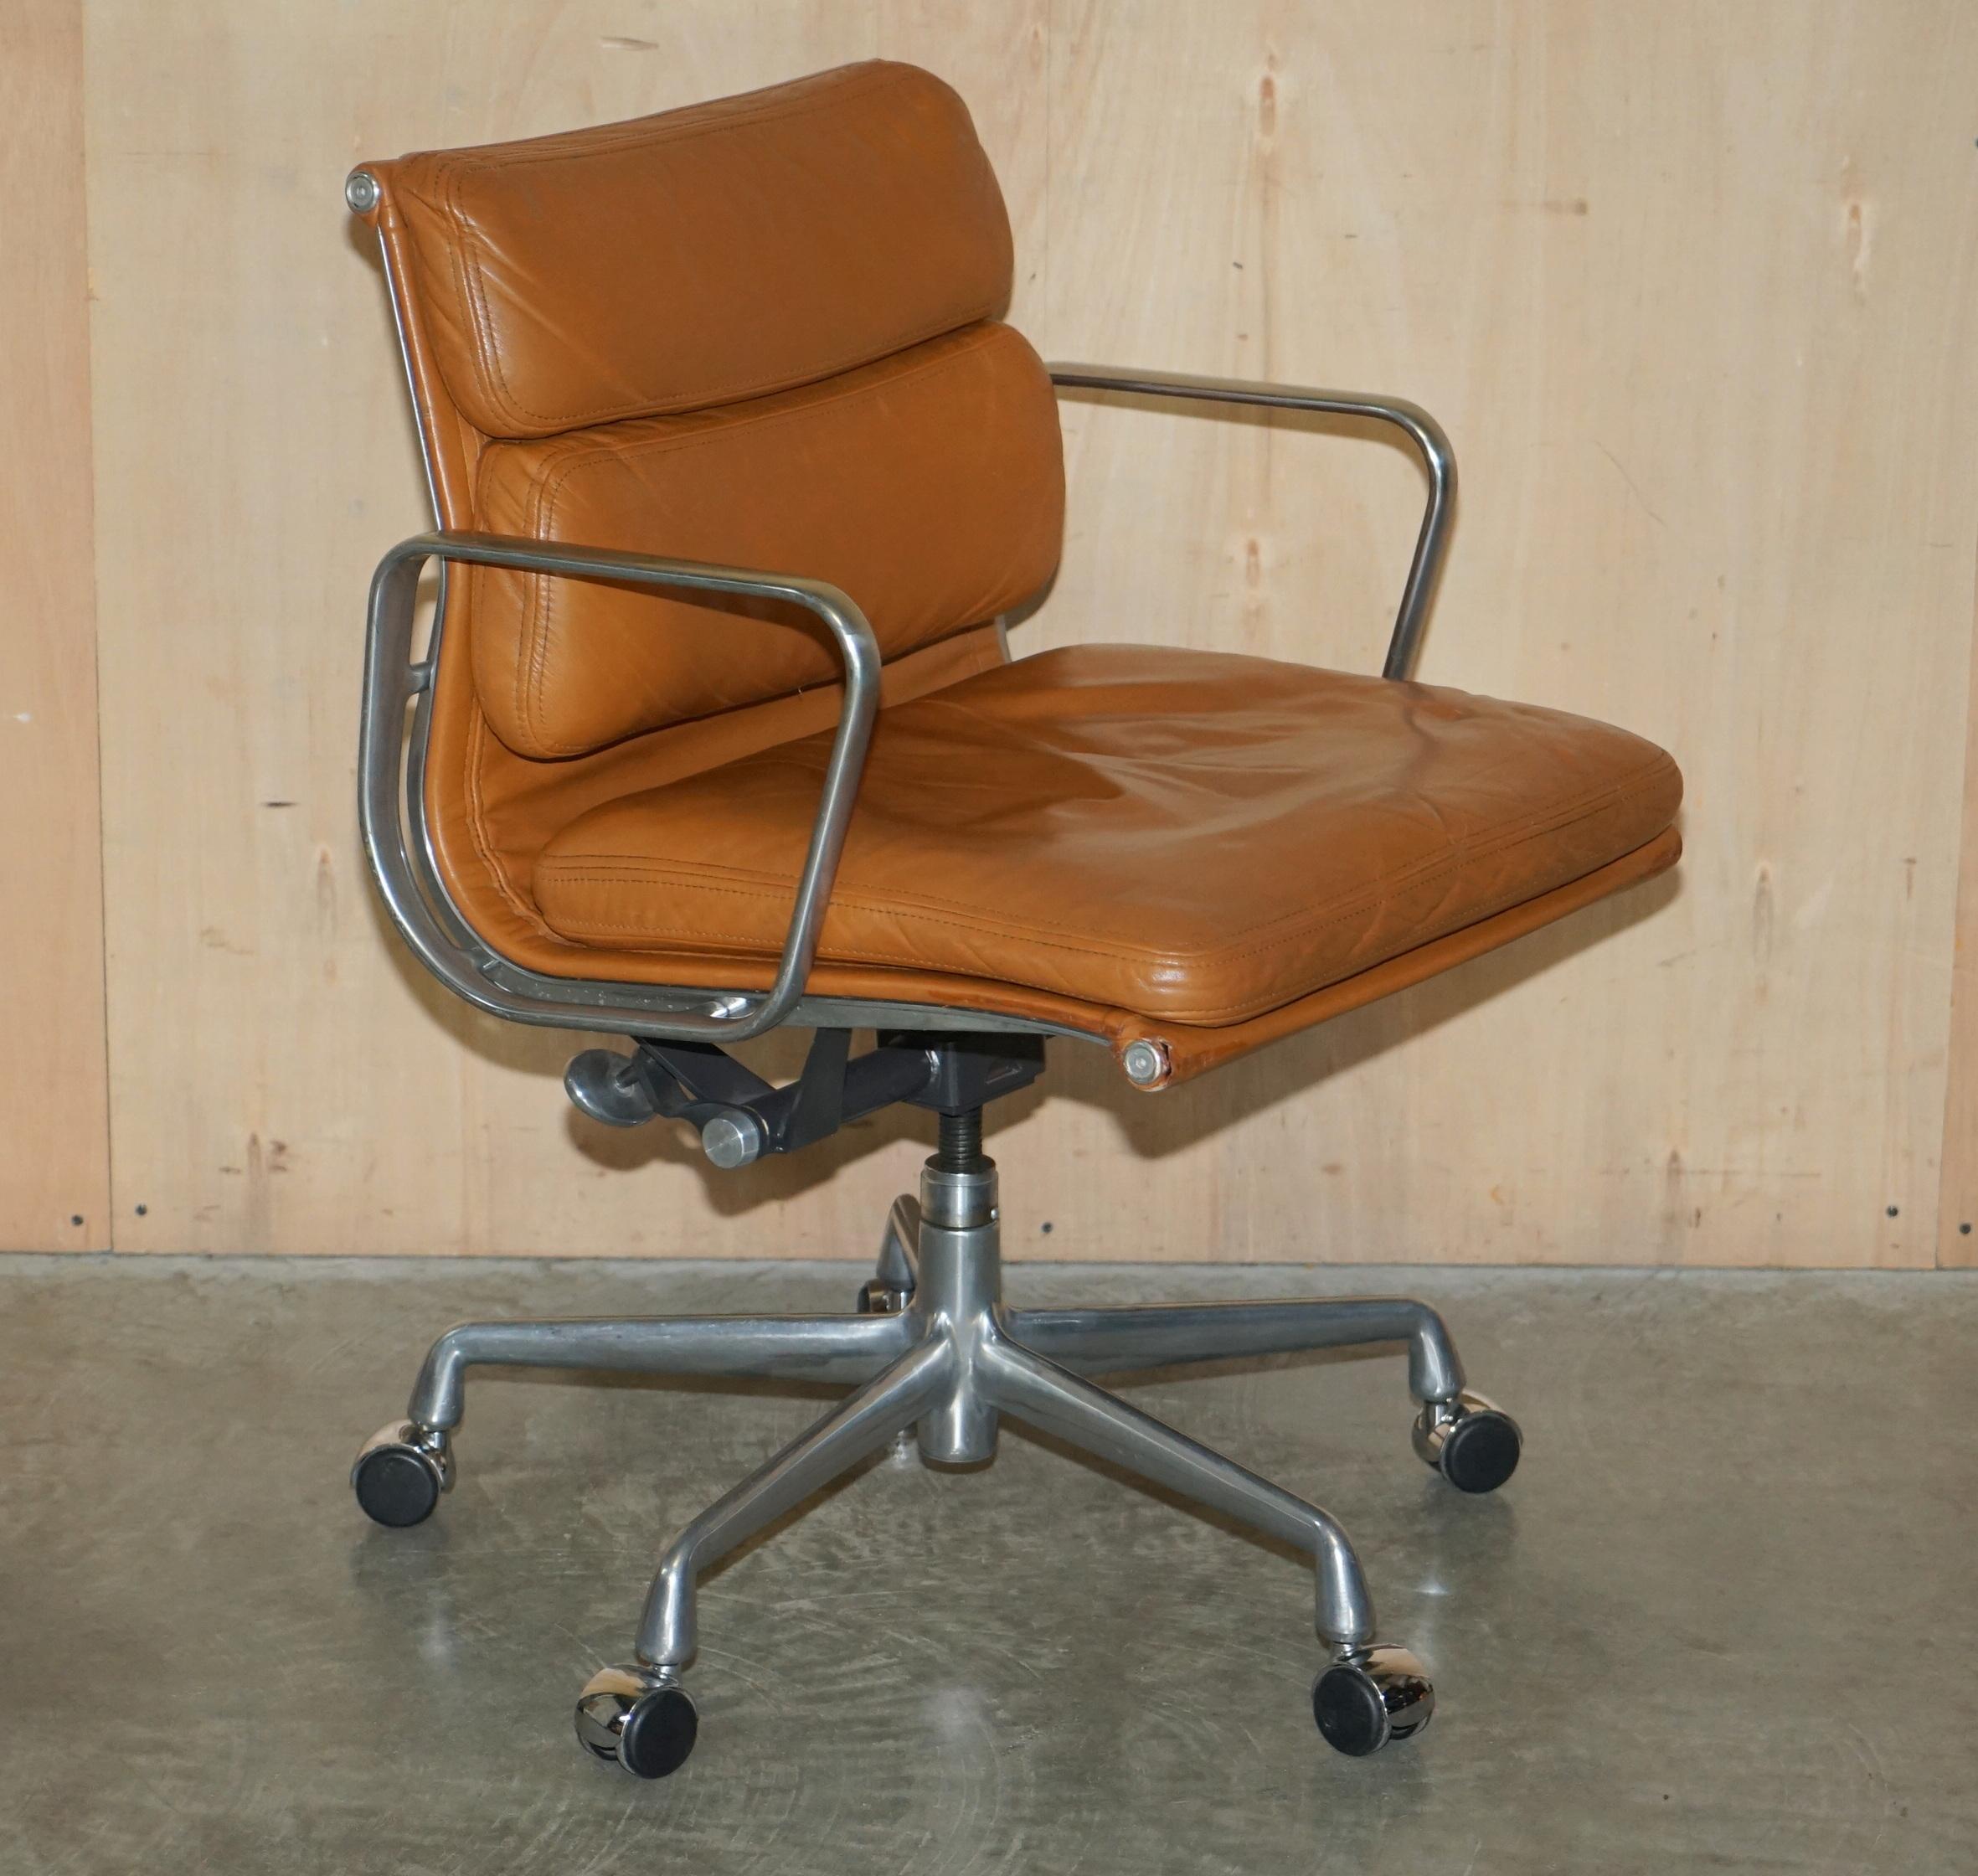 European Chanel Office 1991 Herman Miller Eames Ea217 Cognac Leather Softpad Office Chair